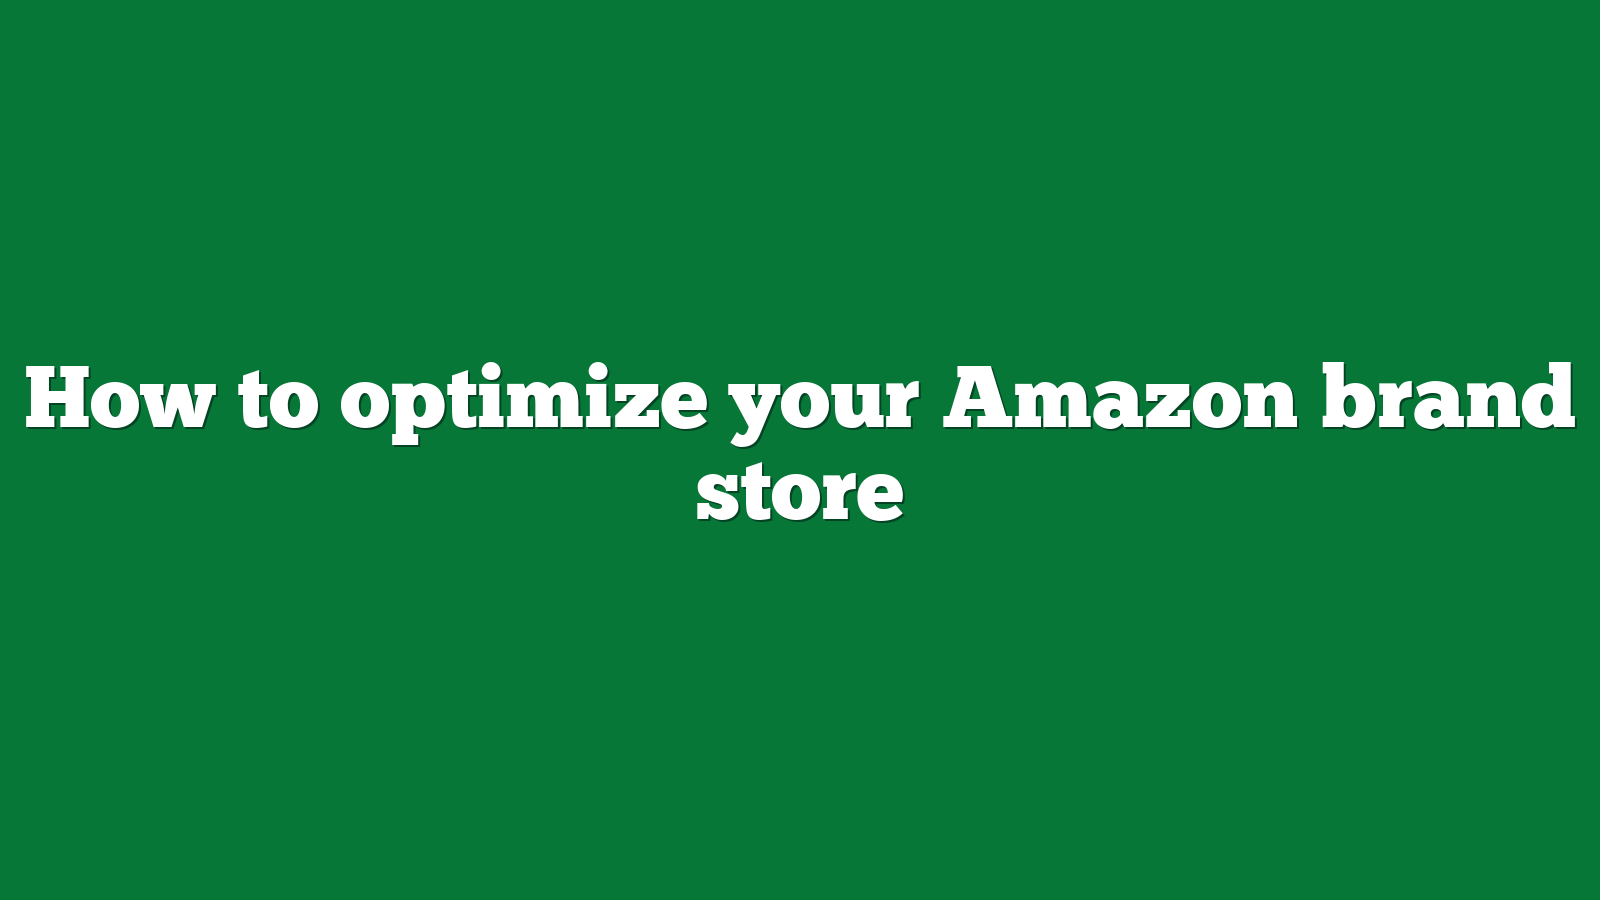 How to optimize your Amazon brand store